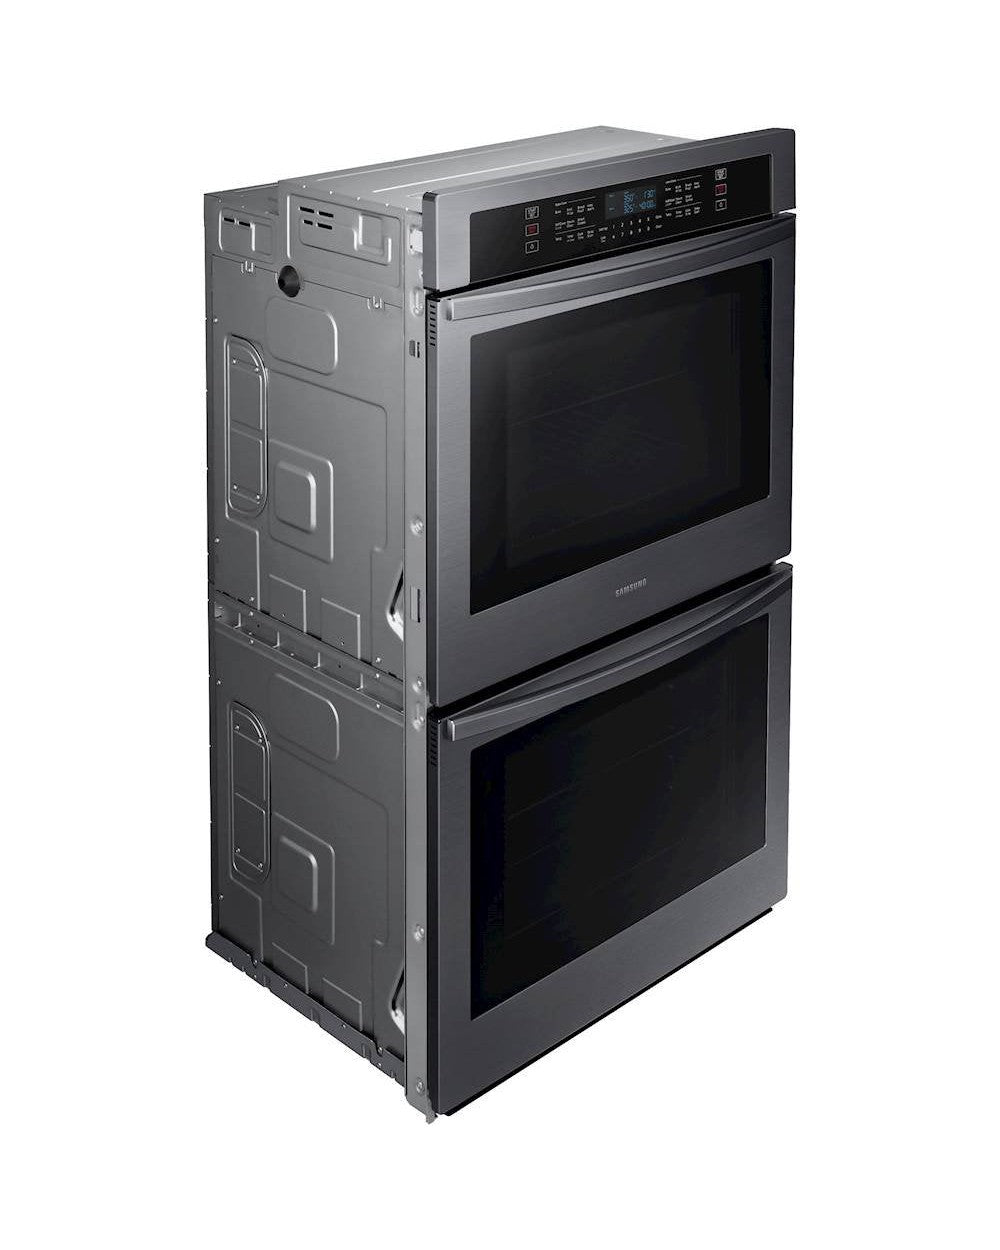 SAMSUNG NV51T5511DG/AA 30&quot; Smart Double Wall Oven in Black Stainless Steel